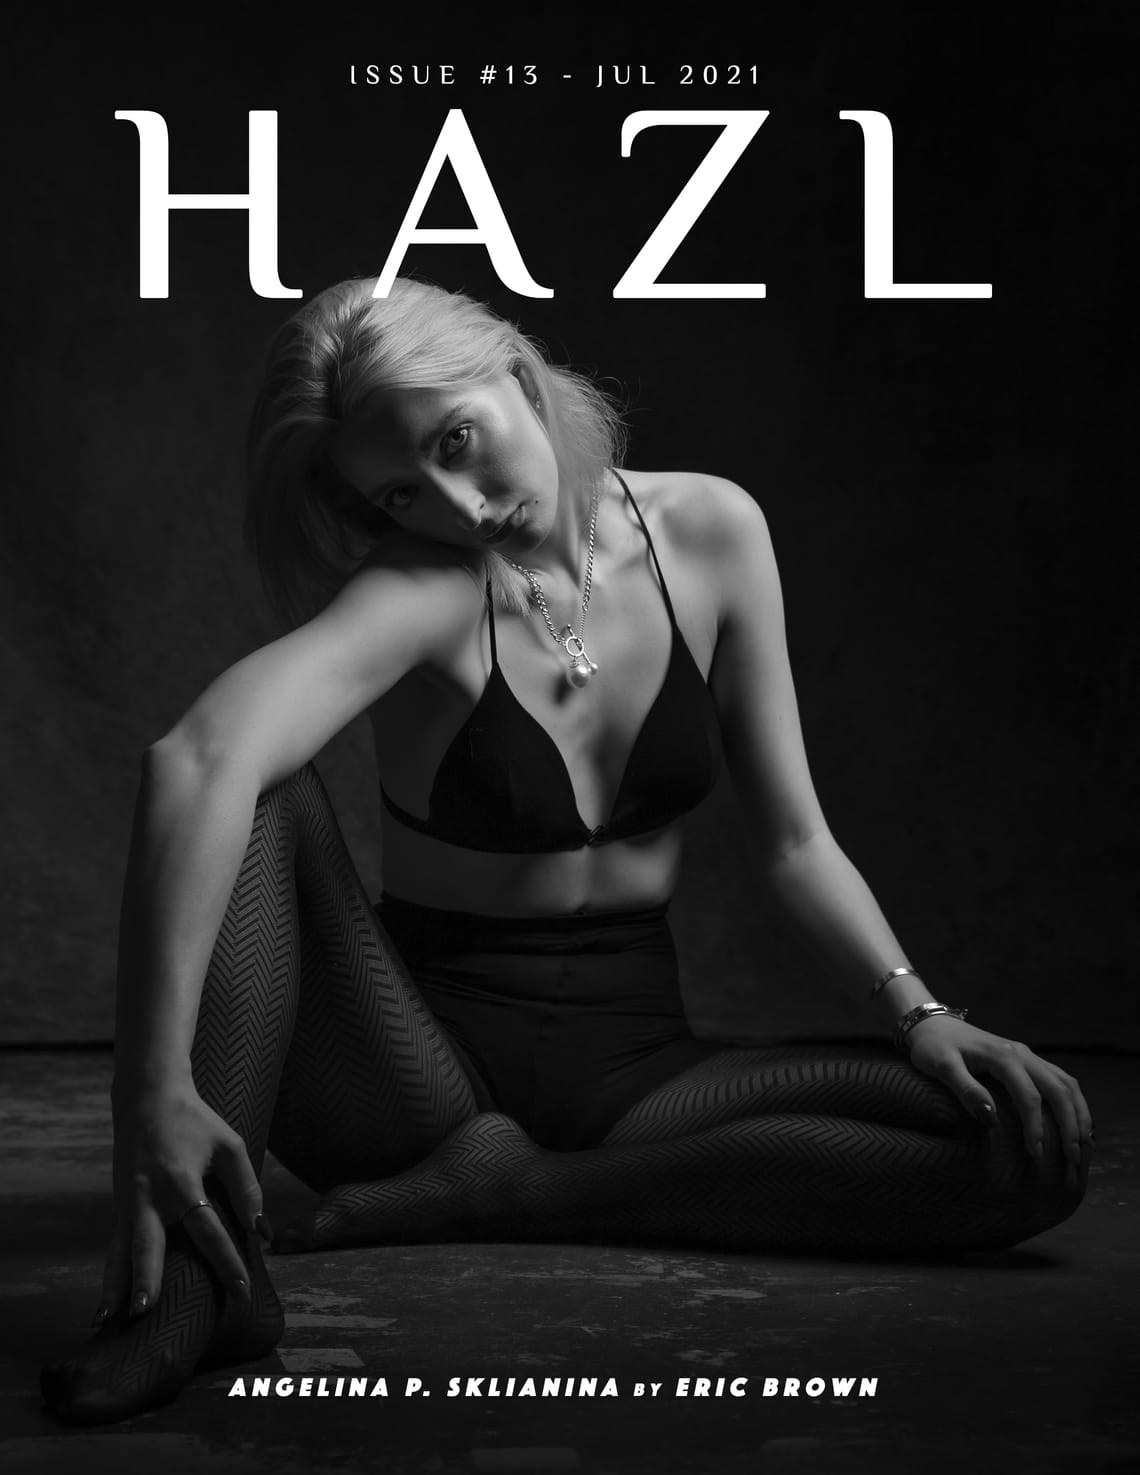 HAZL Magazine Issue #13 -  July 2021 Launched Worldwide